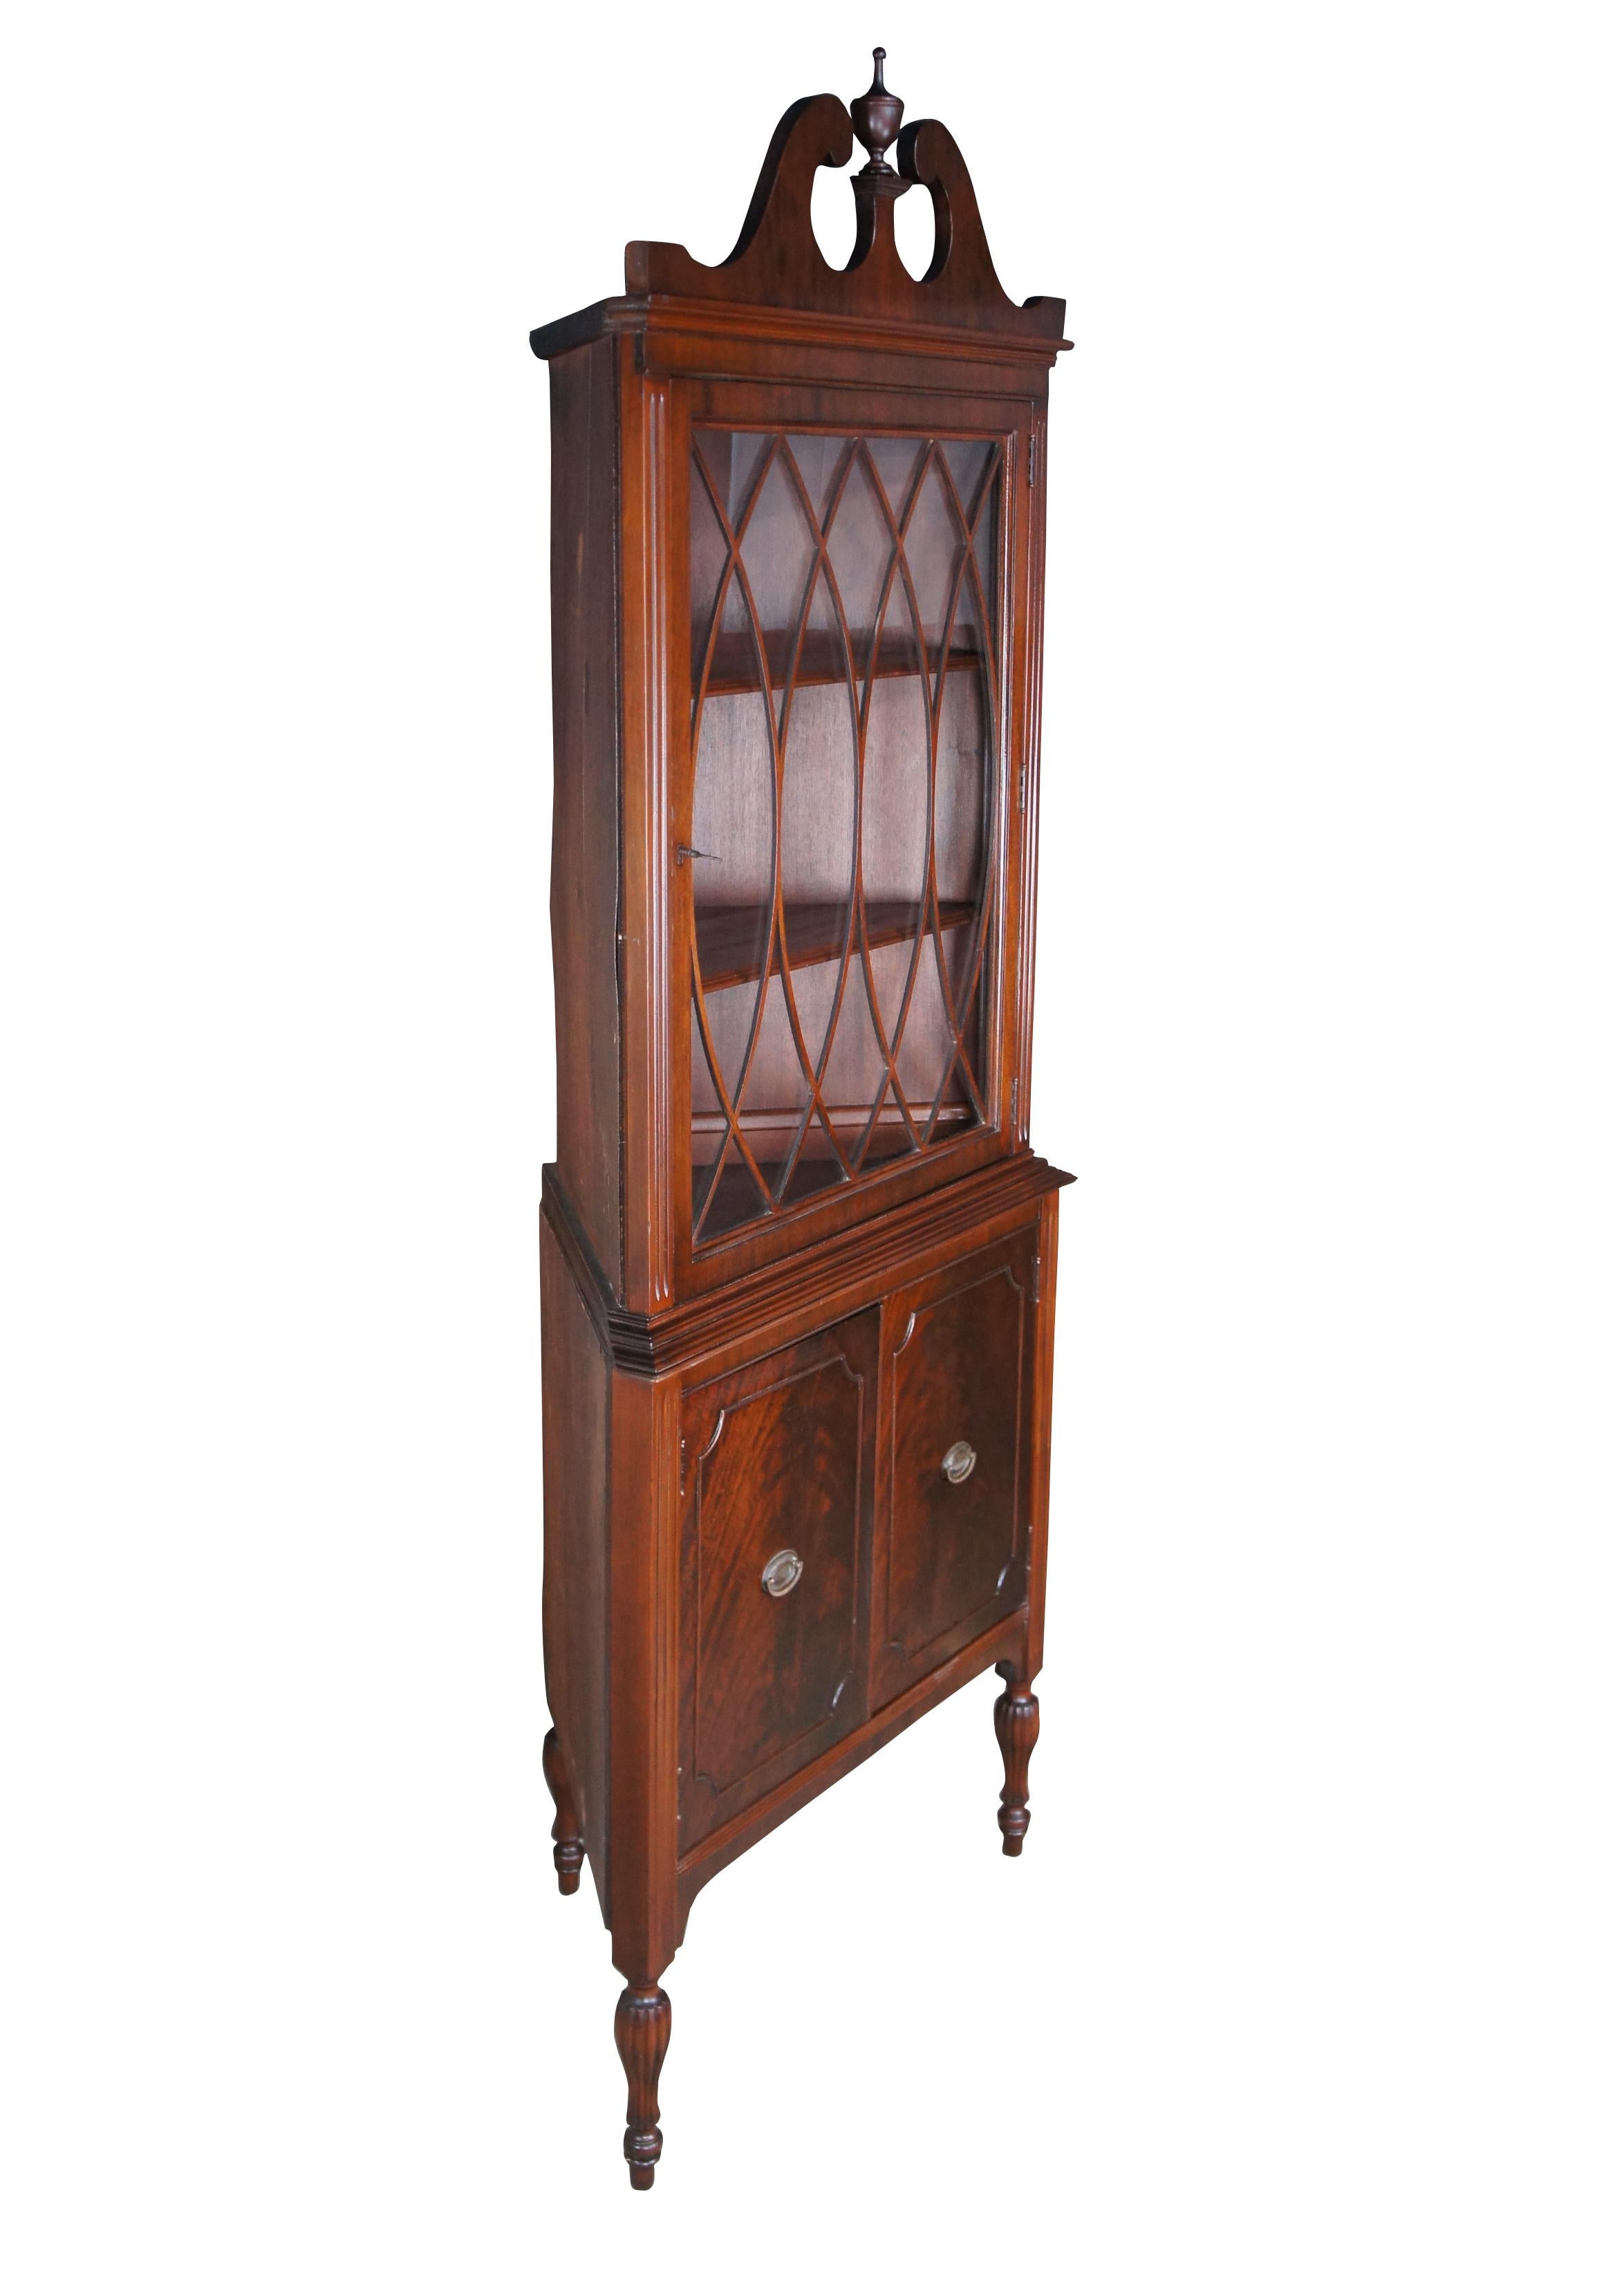 Antique Rockford Furniture Company B Line corner china cabinet / curio.  Made of mahogany featuring upper cabinet with lattice doors, fluted accents and serpentine open pediment crown with trophy finial over lower cabinet and tapered reeded legs